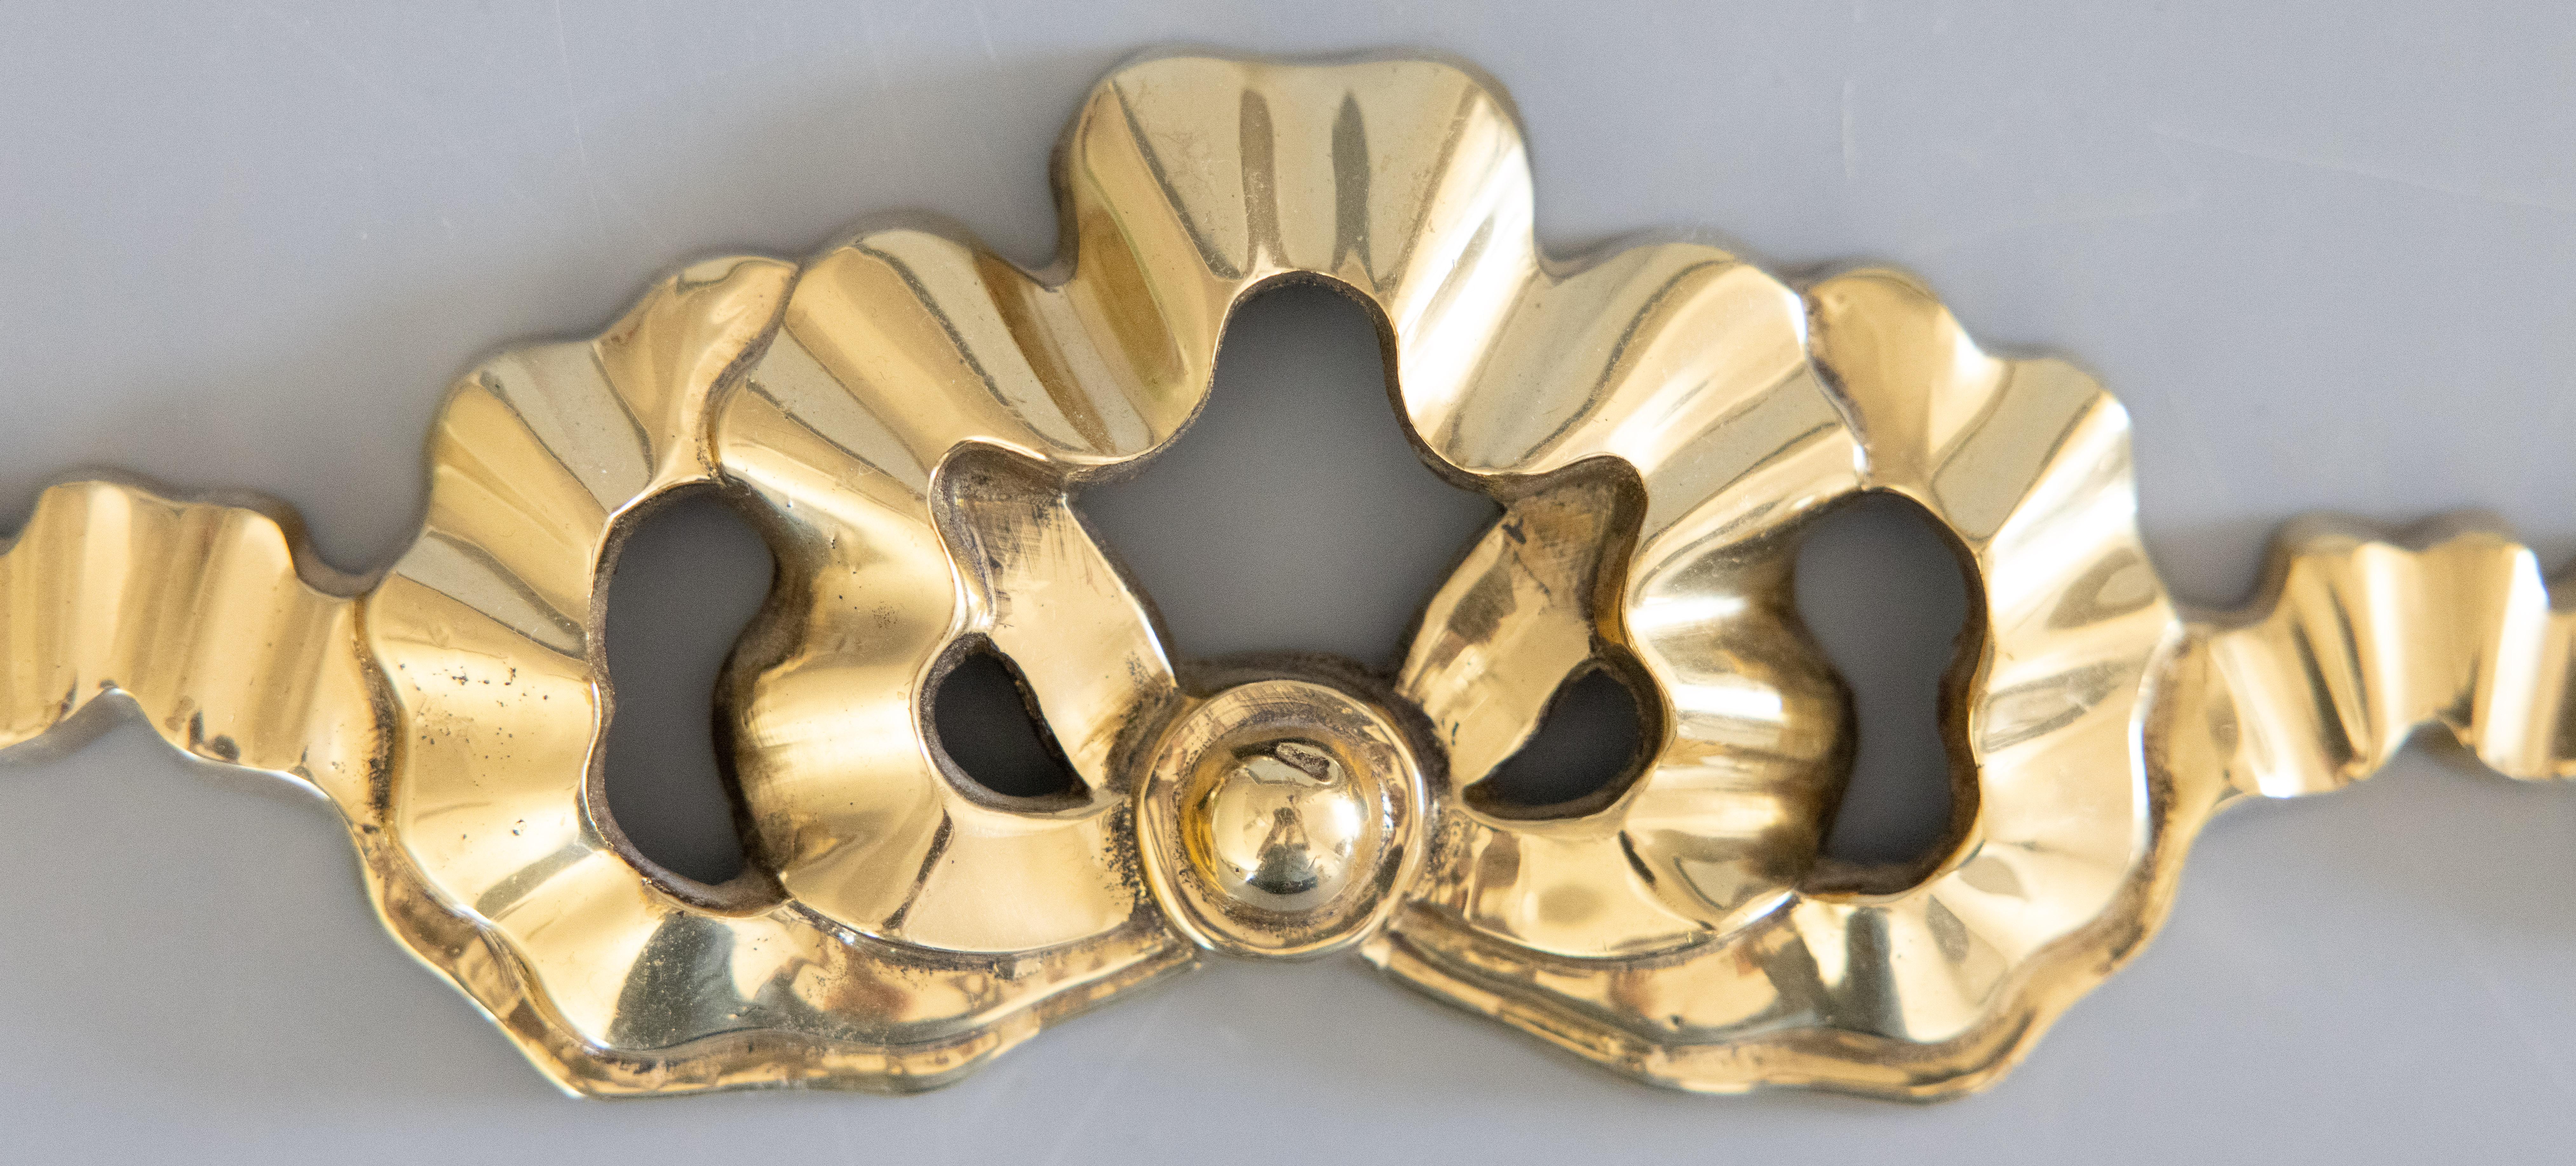 A beautiful vintage French brass bow and ribbon wall ornament swag garland. This charming wall swag has a beautiful brass patina and is the perfect accent piece for any wall.

DIMENSIONS
12.5ʺW × 0.5ʺD × 3.25ʺH